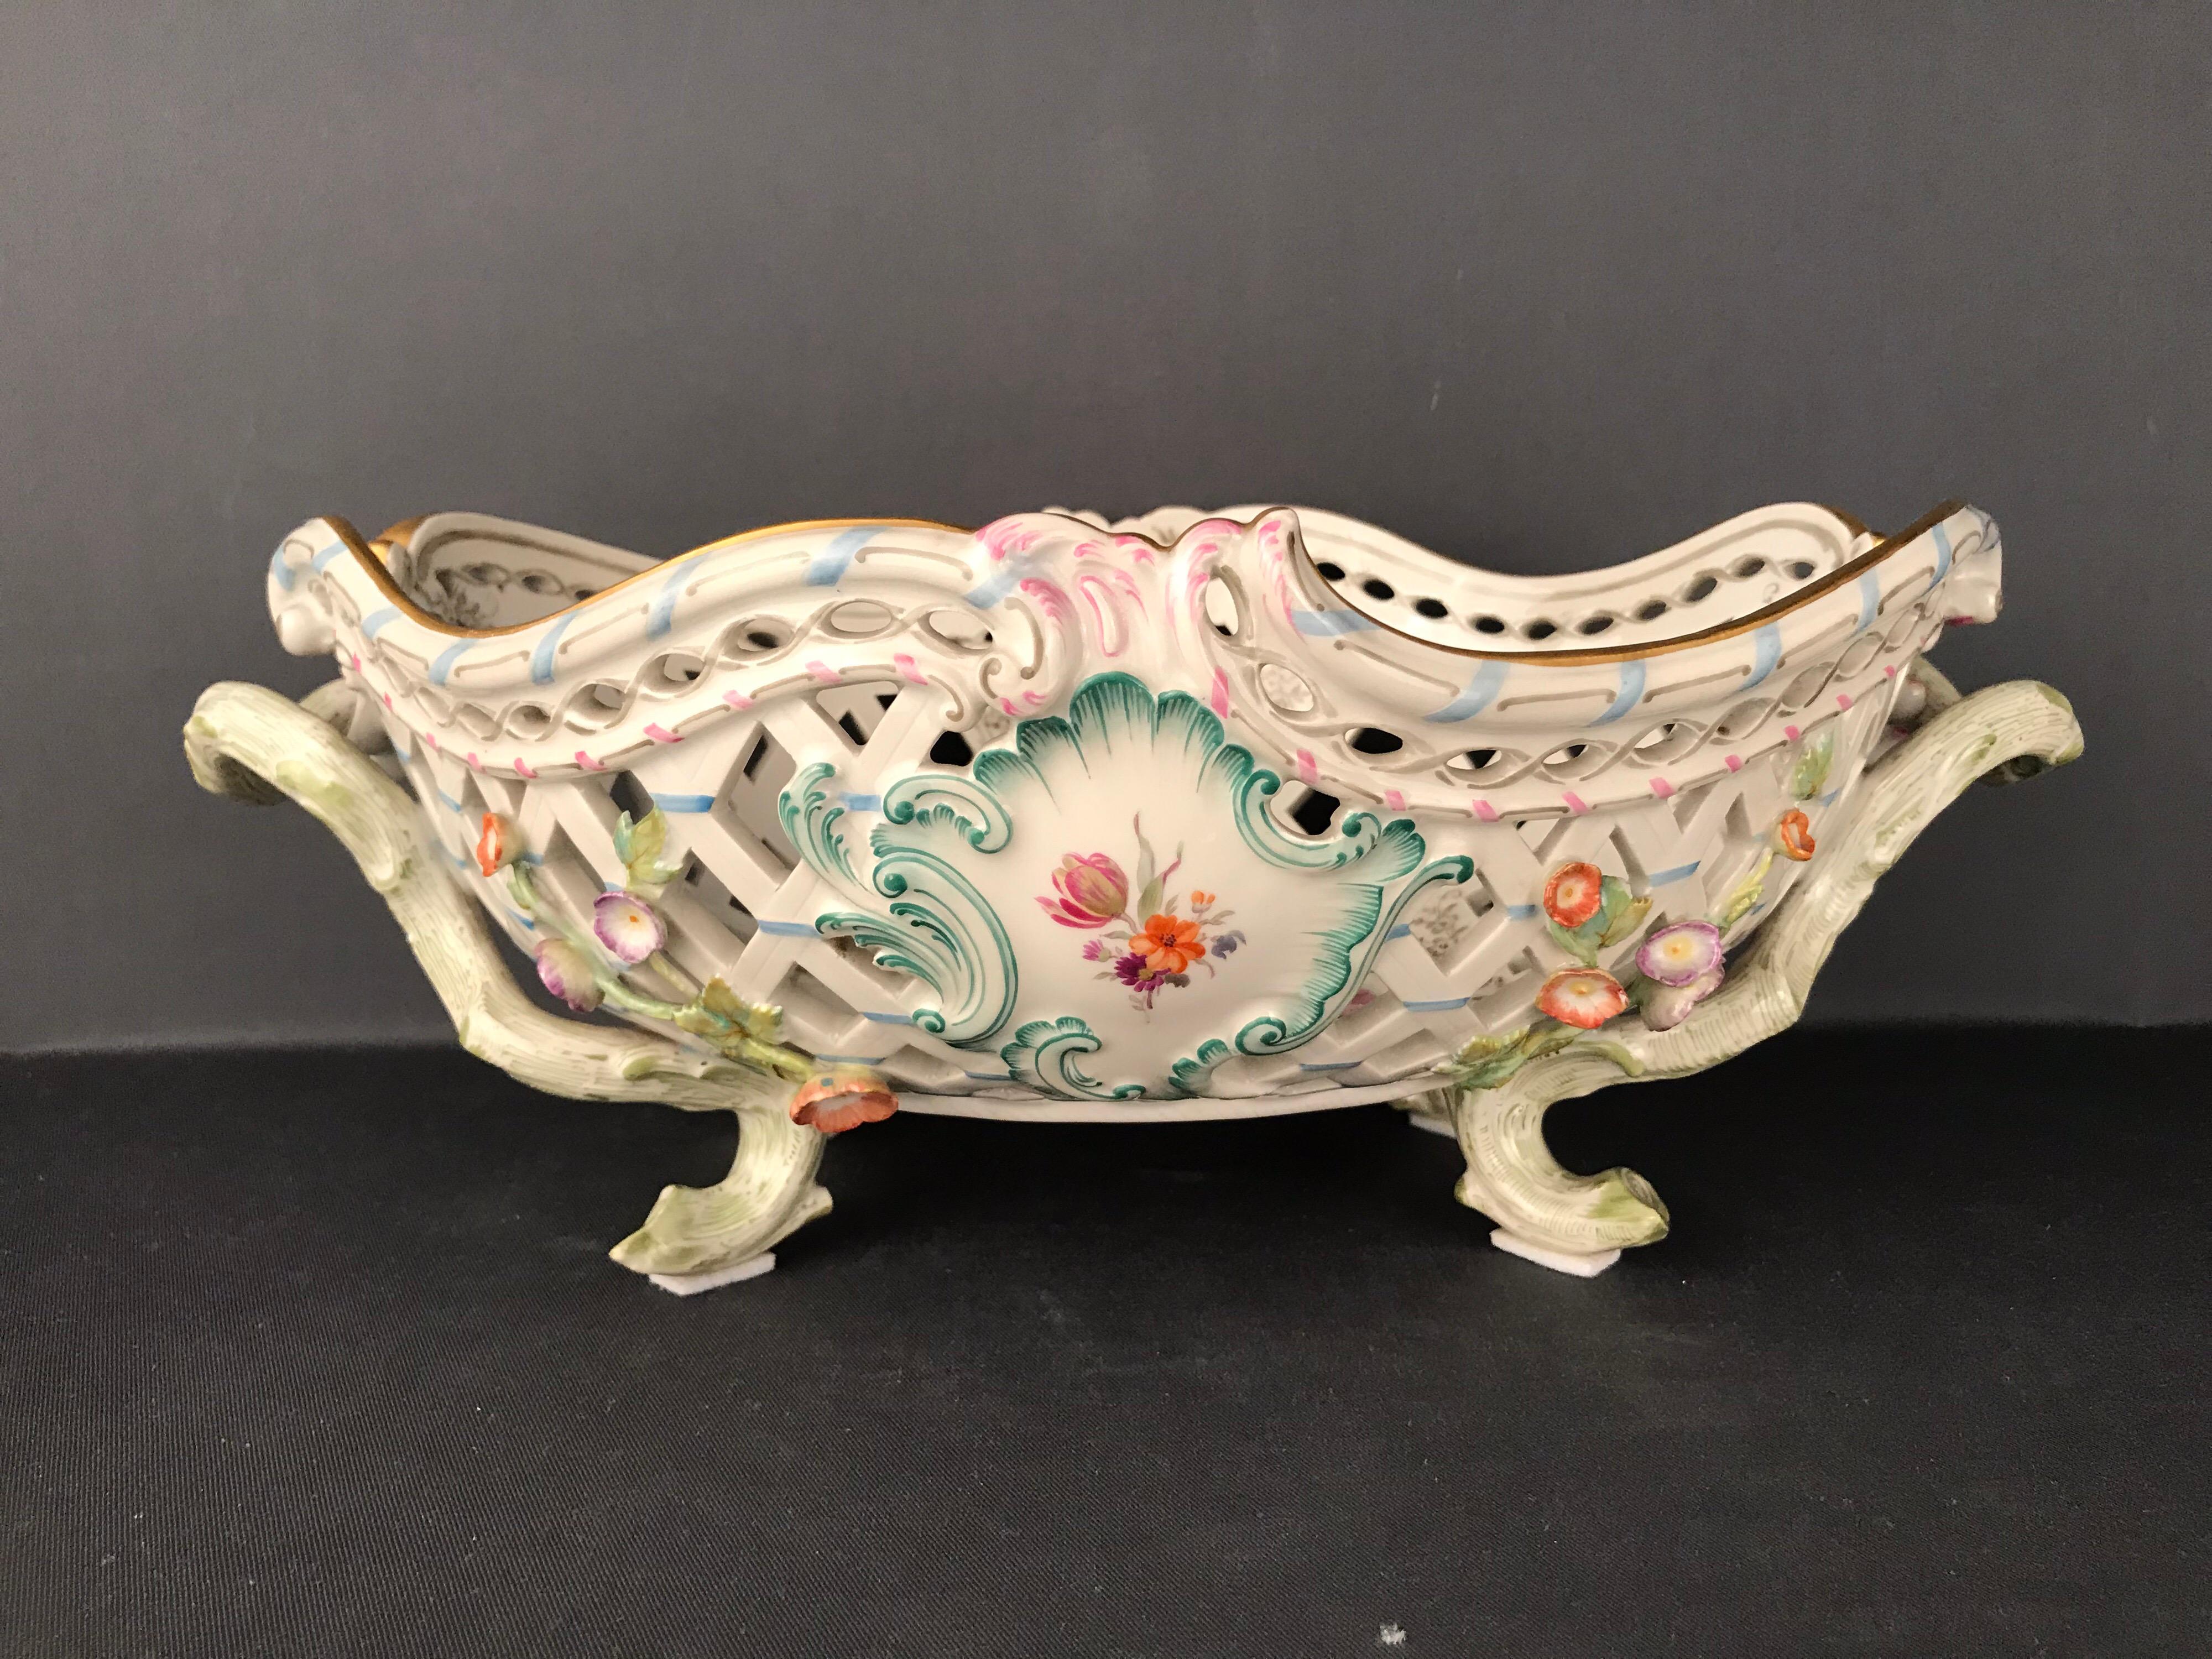 - KPM Berlin fruit basket porcelain 
- first choice with red orb mark
- with plastic flowers 
- hand painted 
- circa 1900
- good condition no cracks or repairs 

